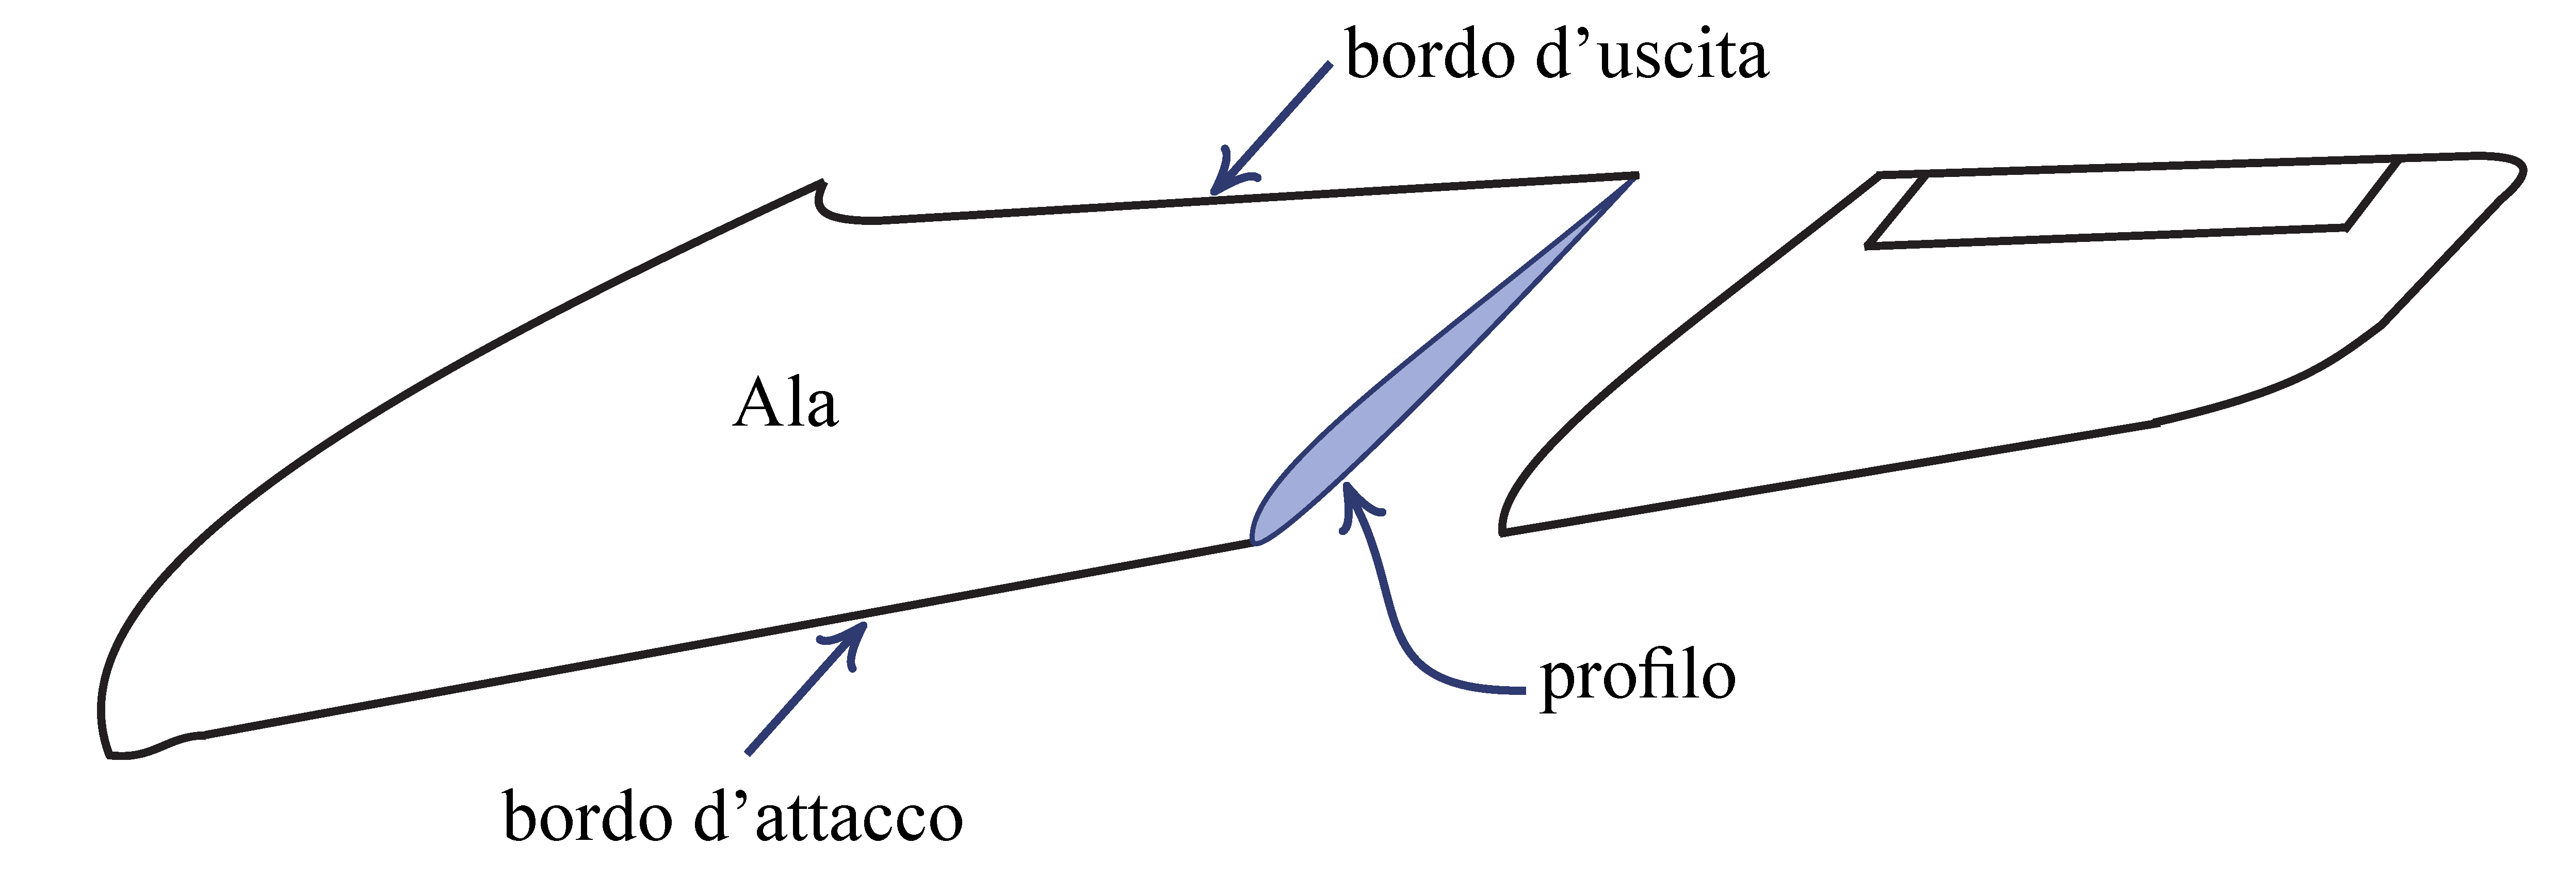 A wing and its profiles (sections).